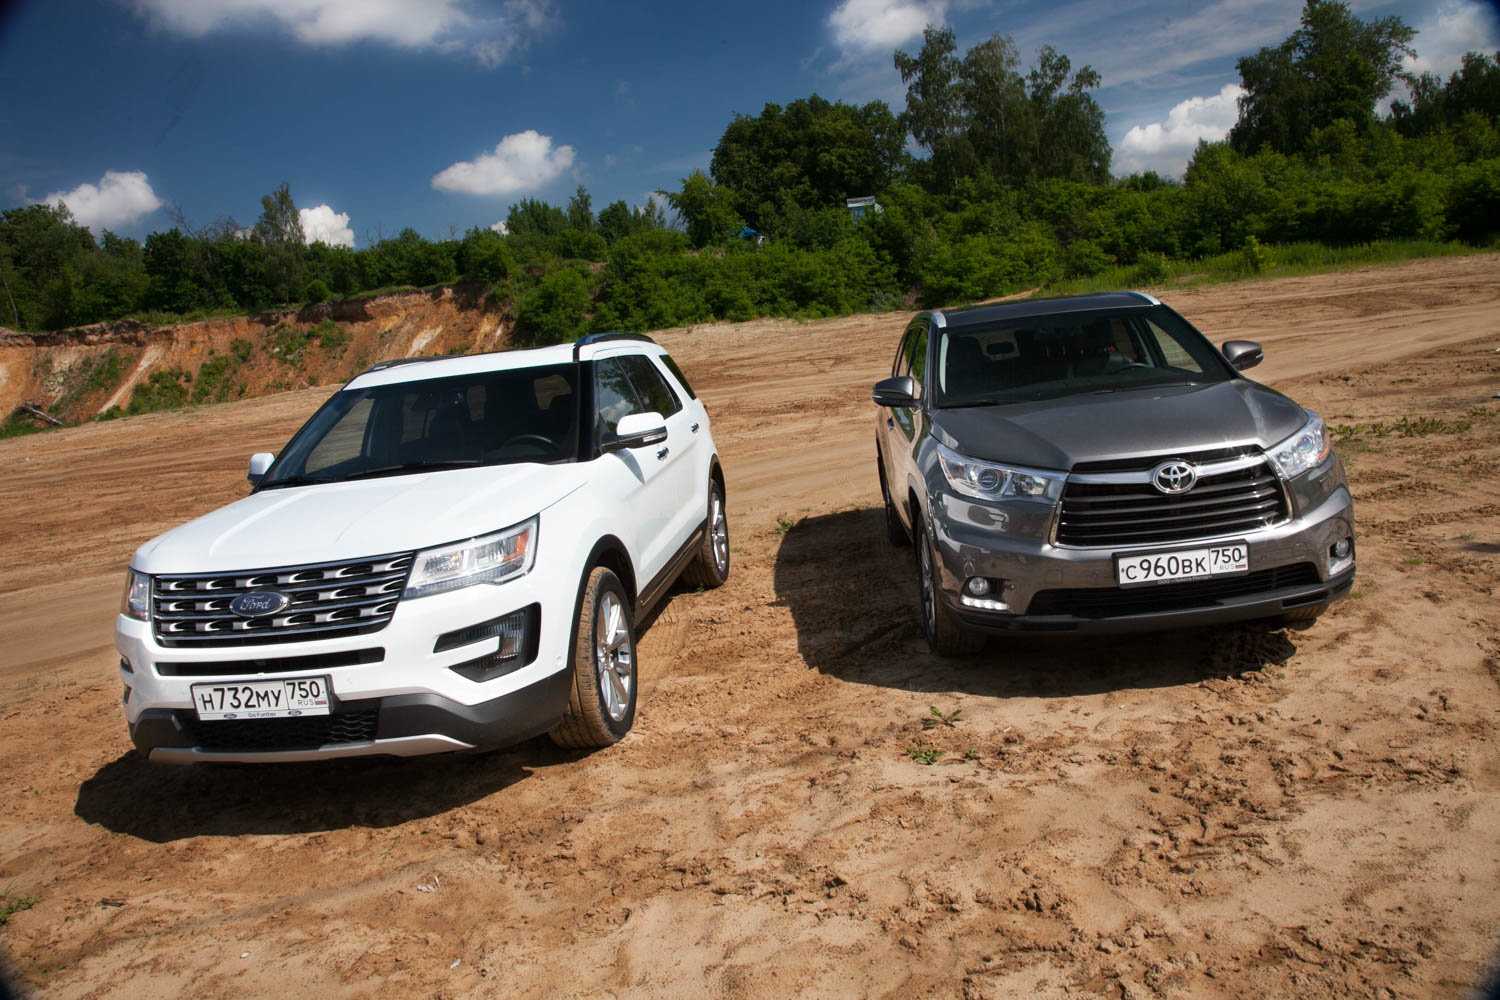 Ford explorer compared to toyota highlander